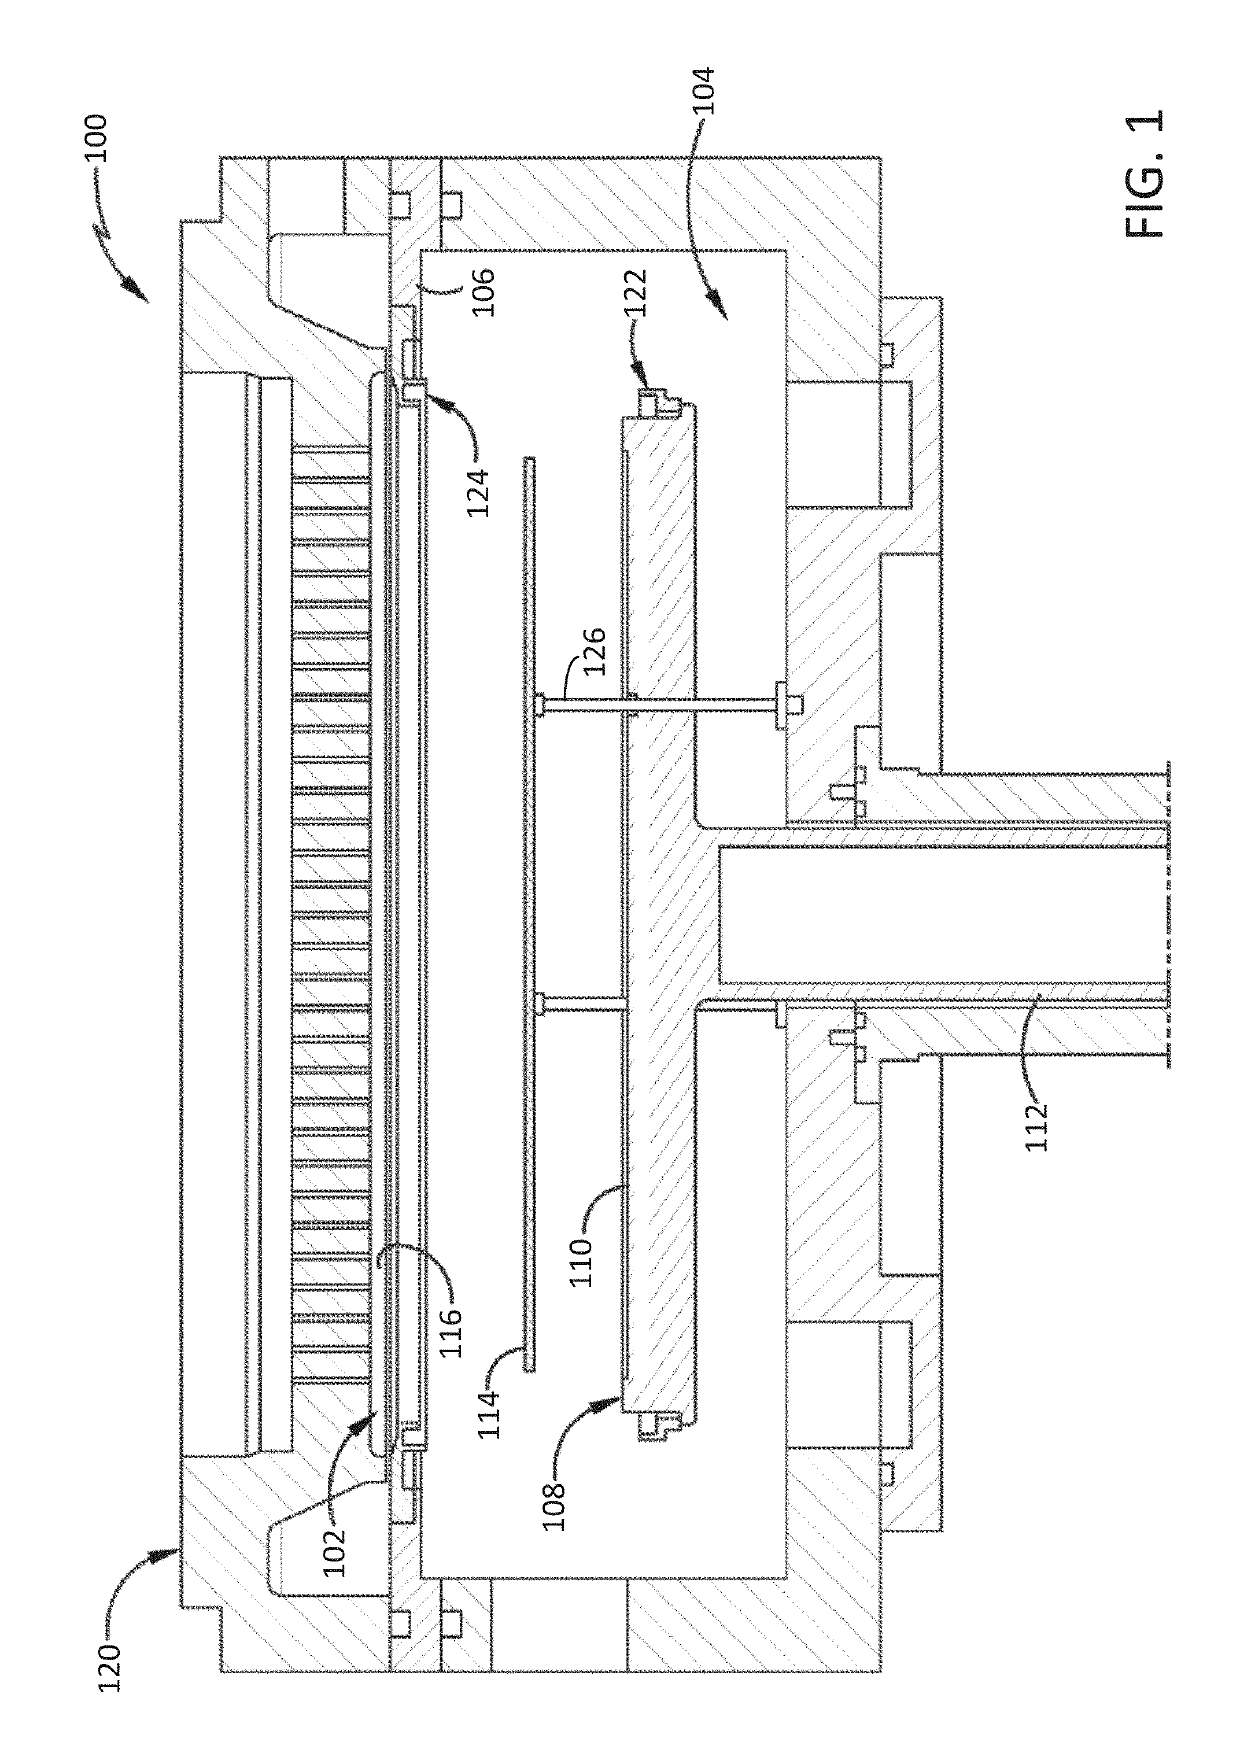 Semiconductor processing apparatus and a method for processing a substrate